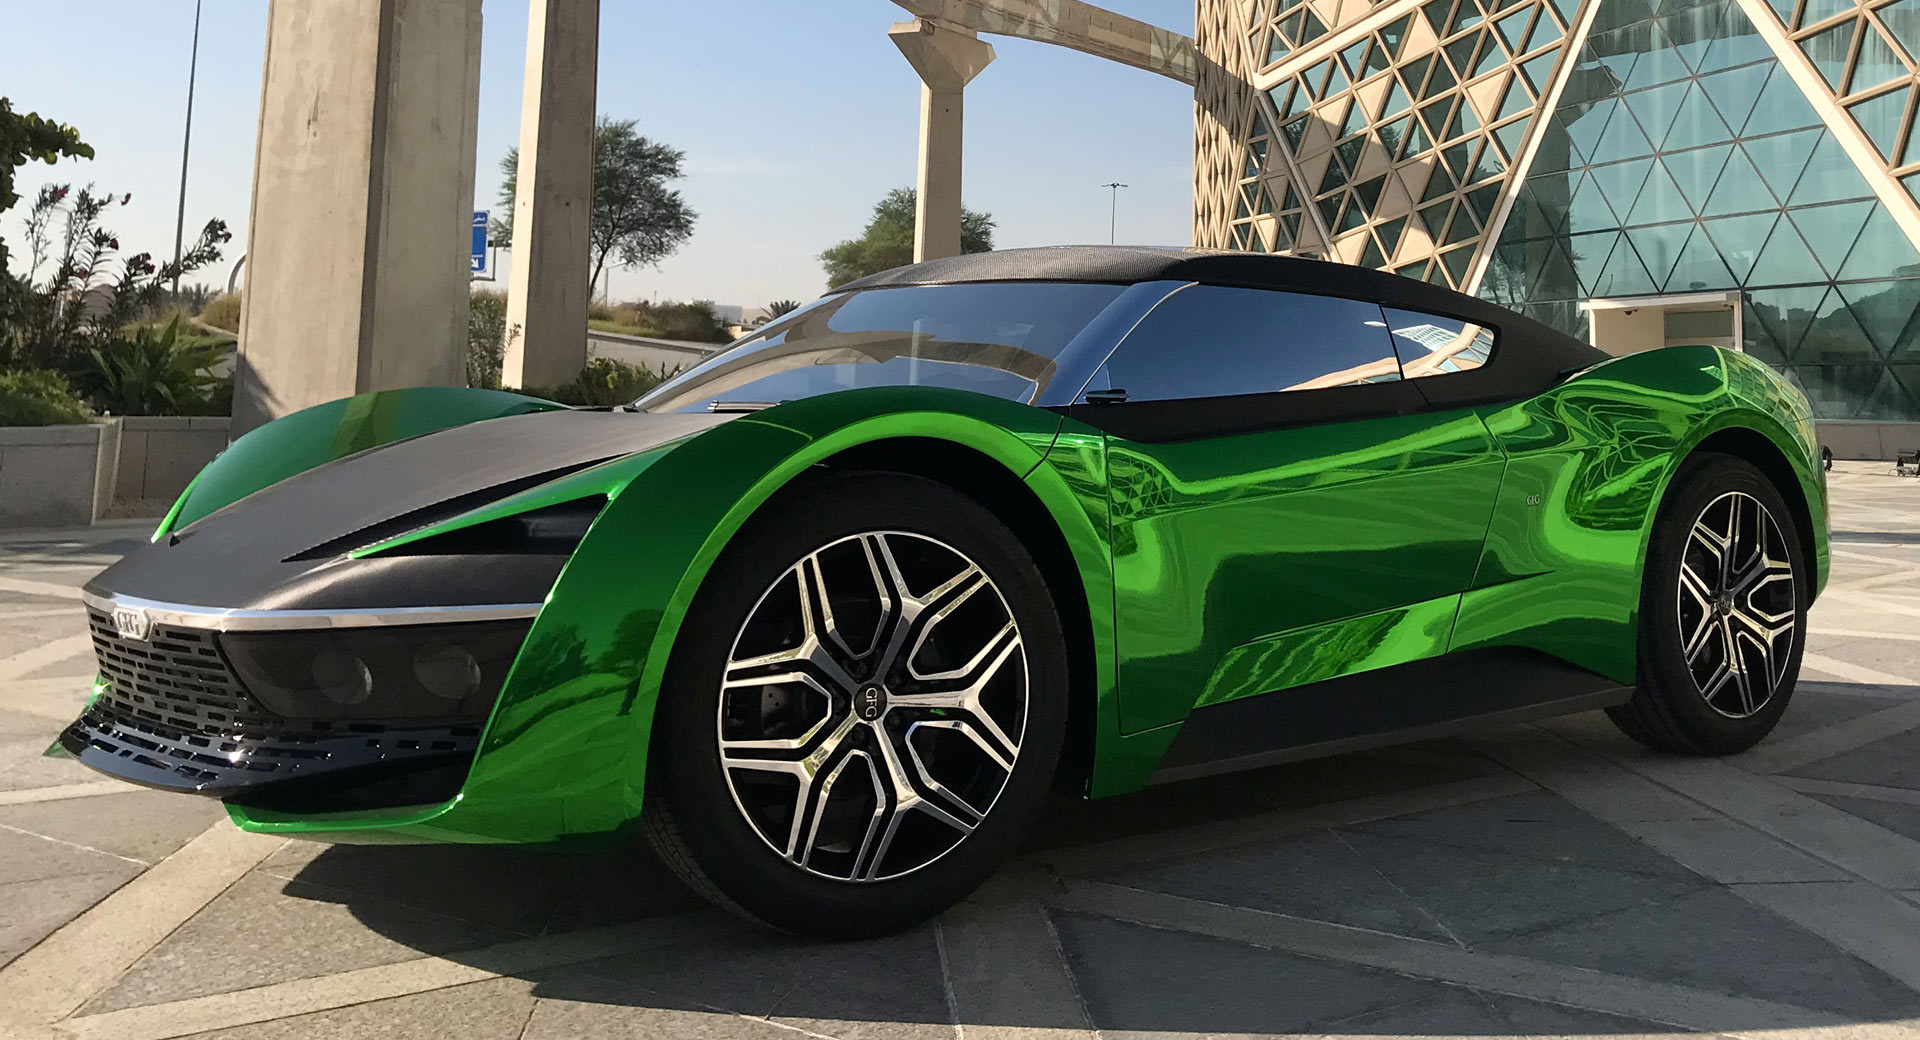 The Gfg Style 2030 Concept Is An Electric All Wheel Drive Sports Car